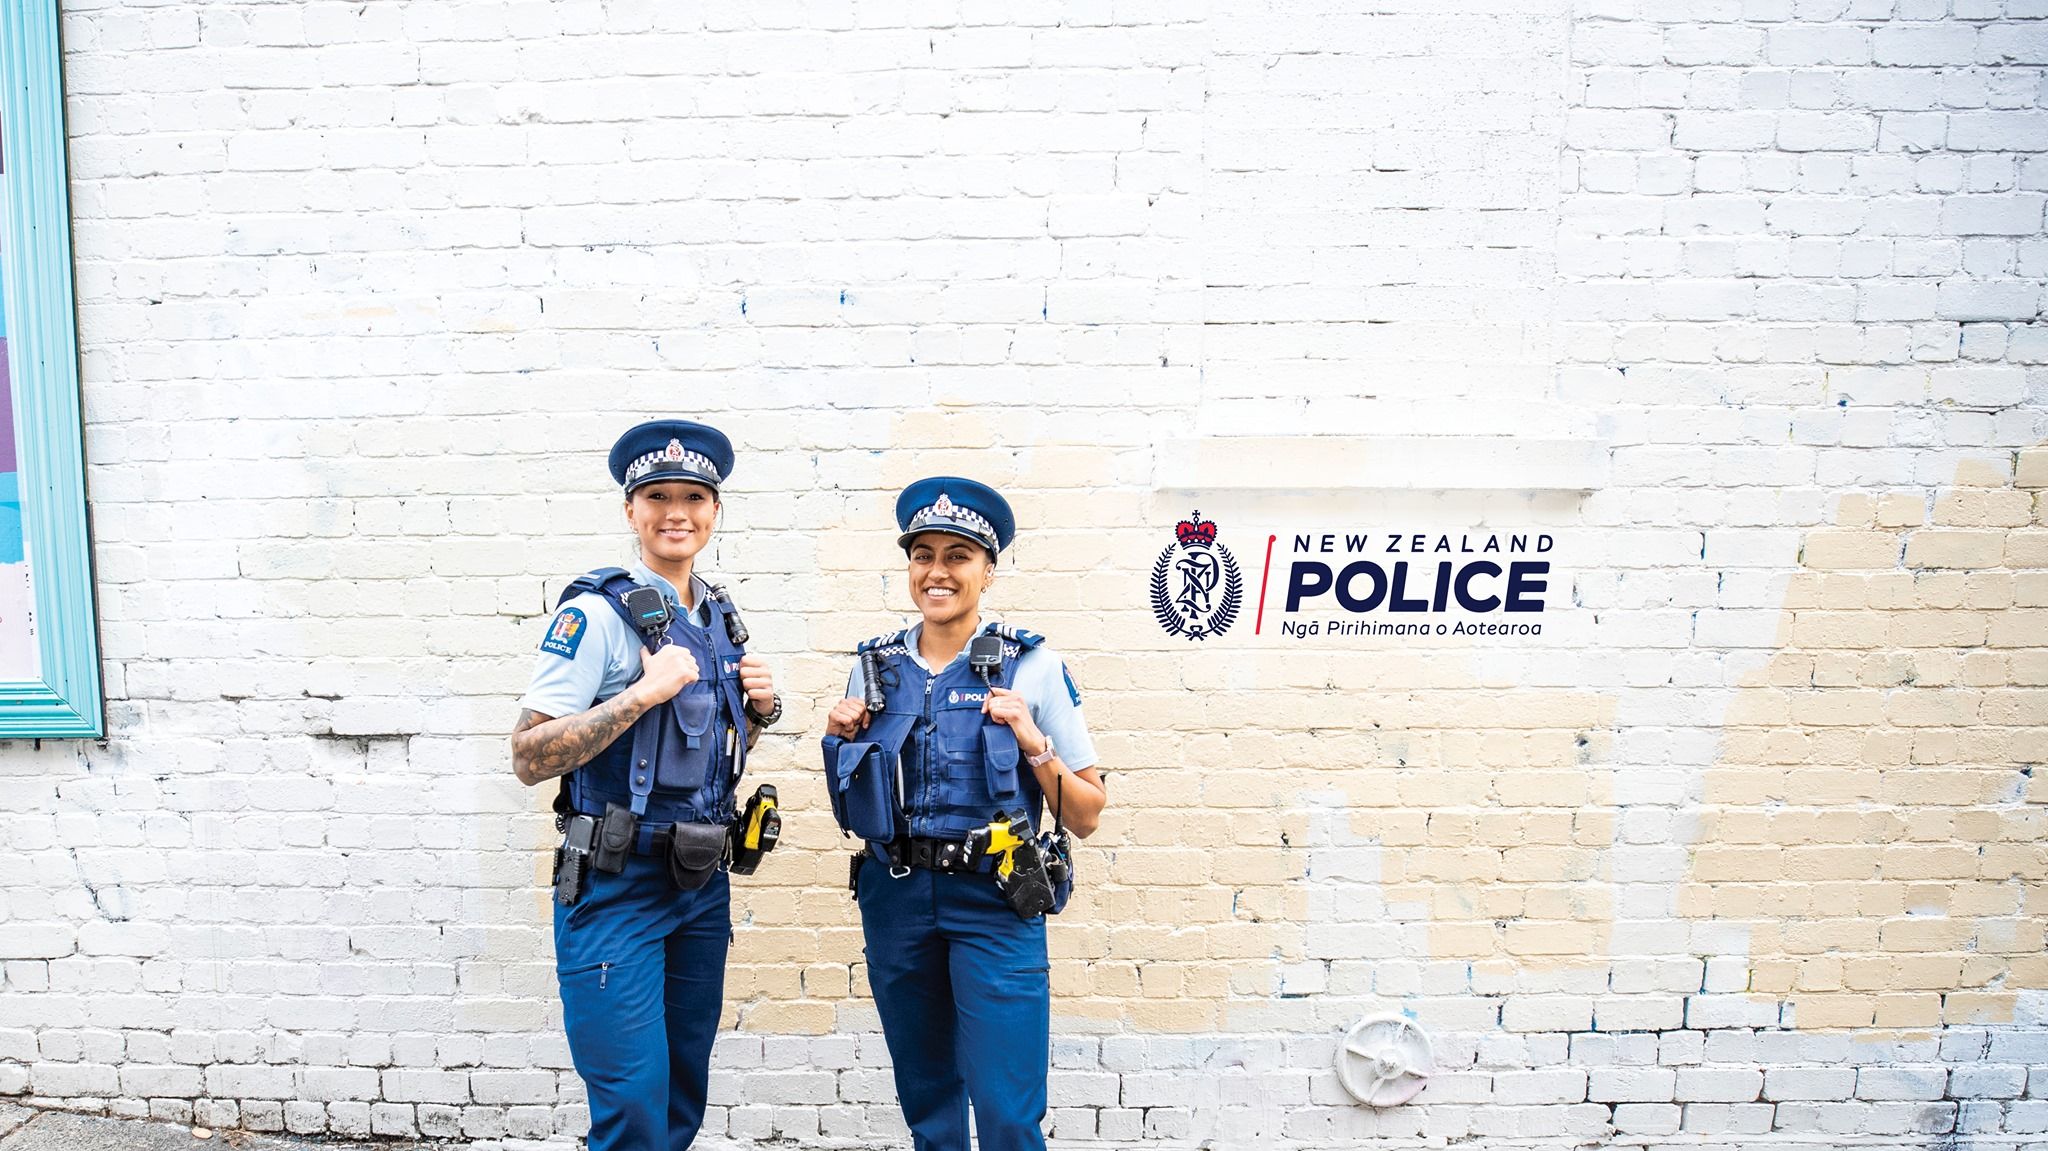 Featured image for “New Zealand Police Association”